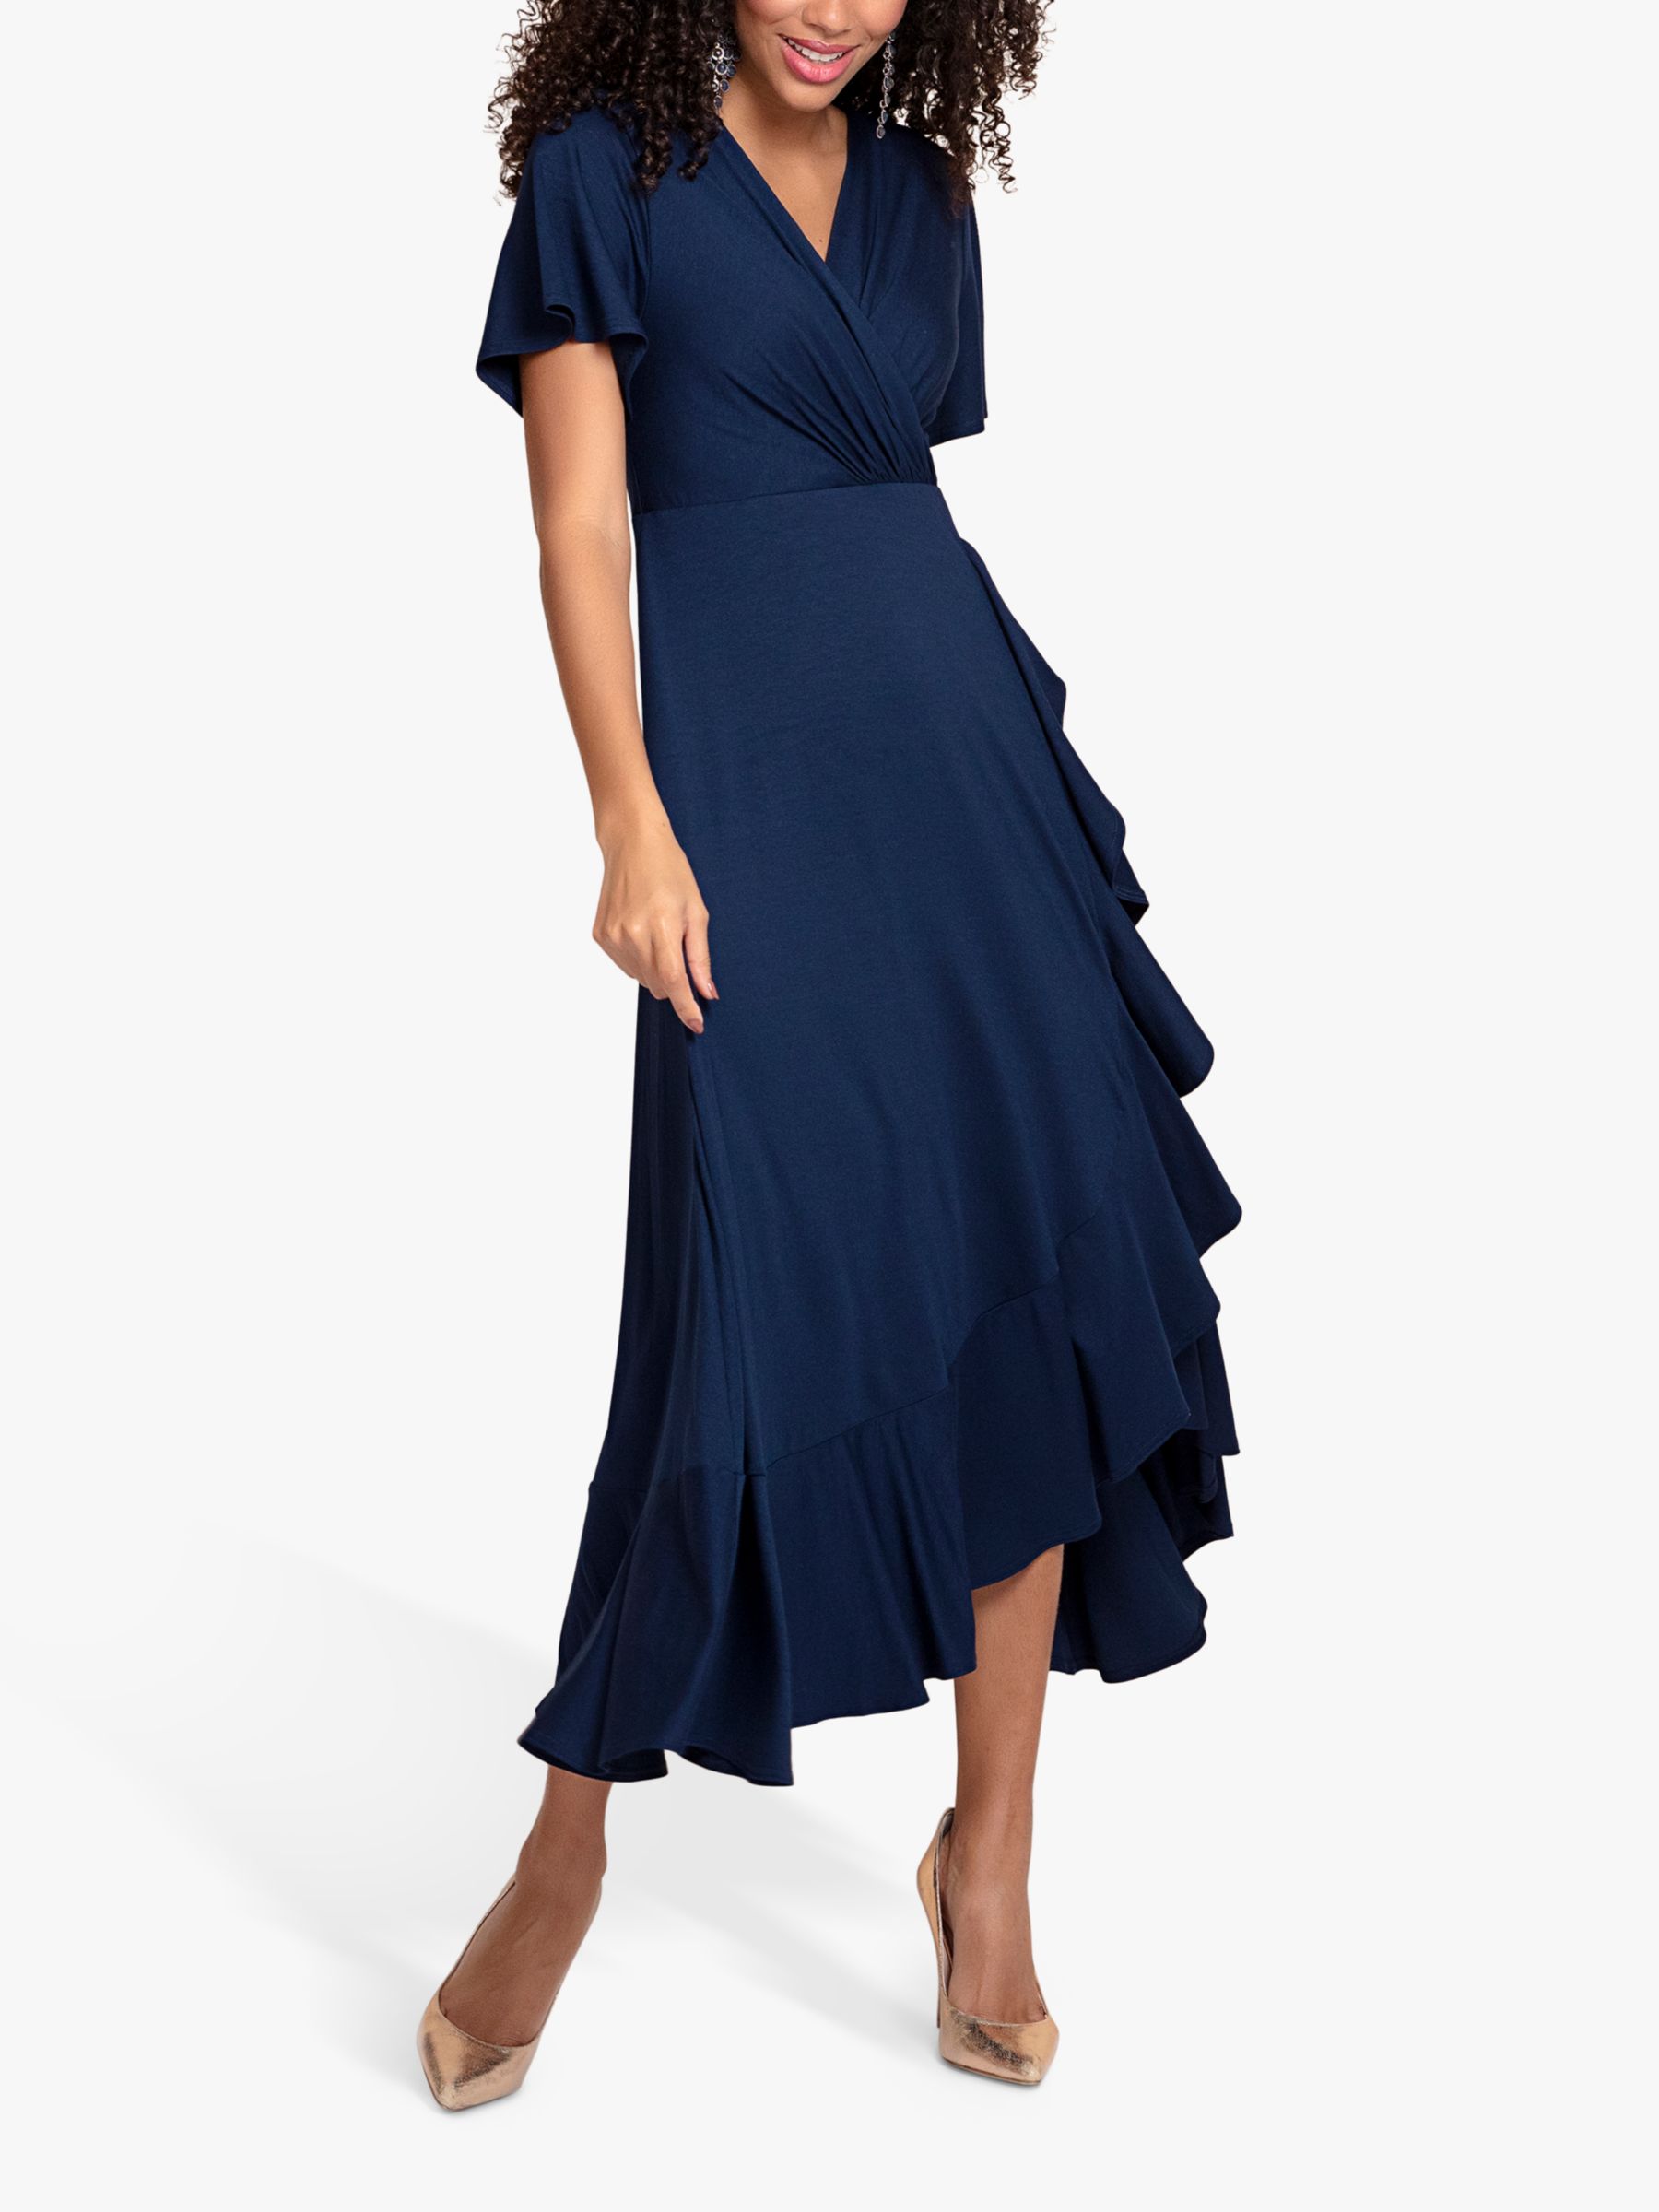 Waterfall Dress Navy - Wedding Dresses, Evening Wear and Party